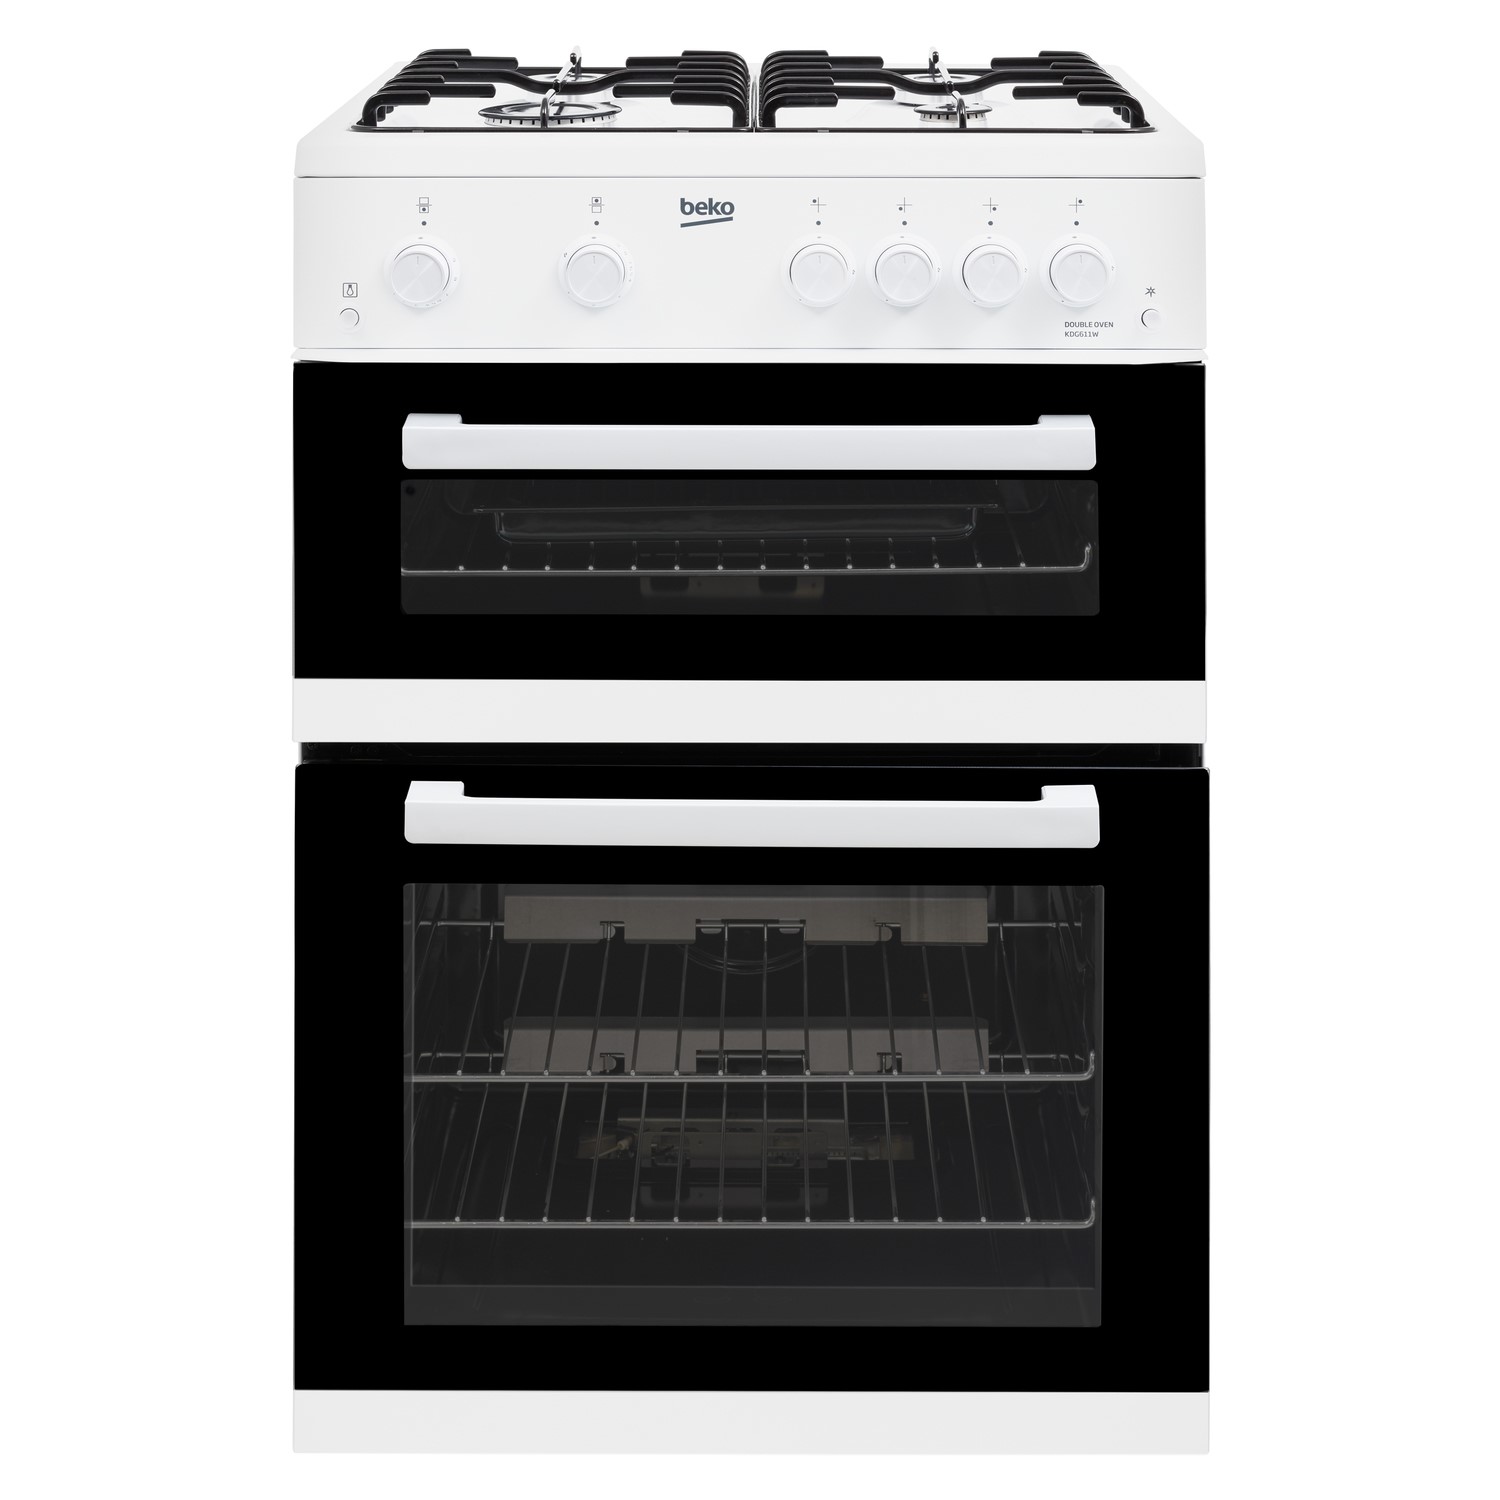 Refurbished Beko KDG611W 60cm Double Oven Gas Cooker - White